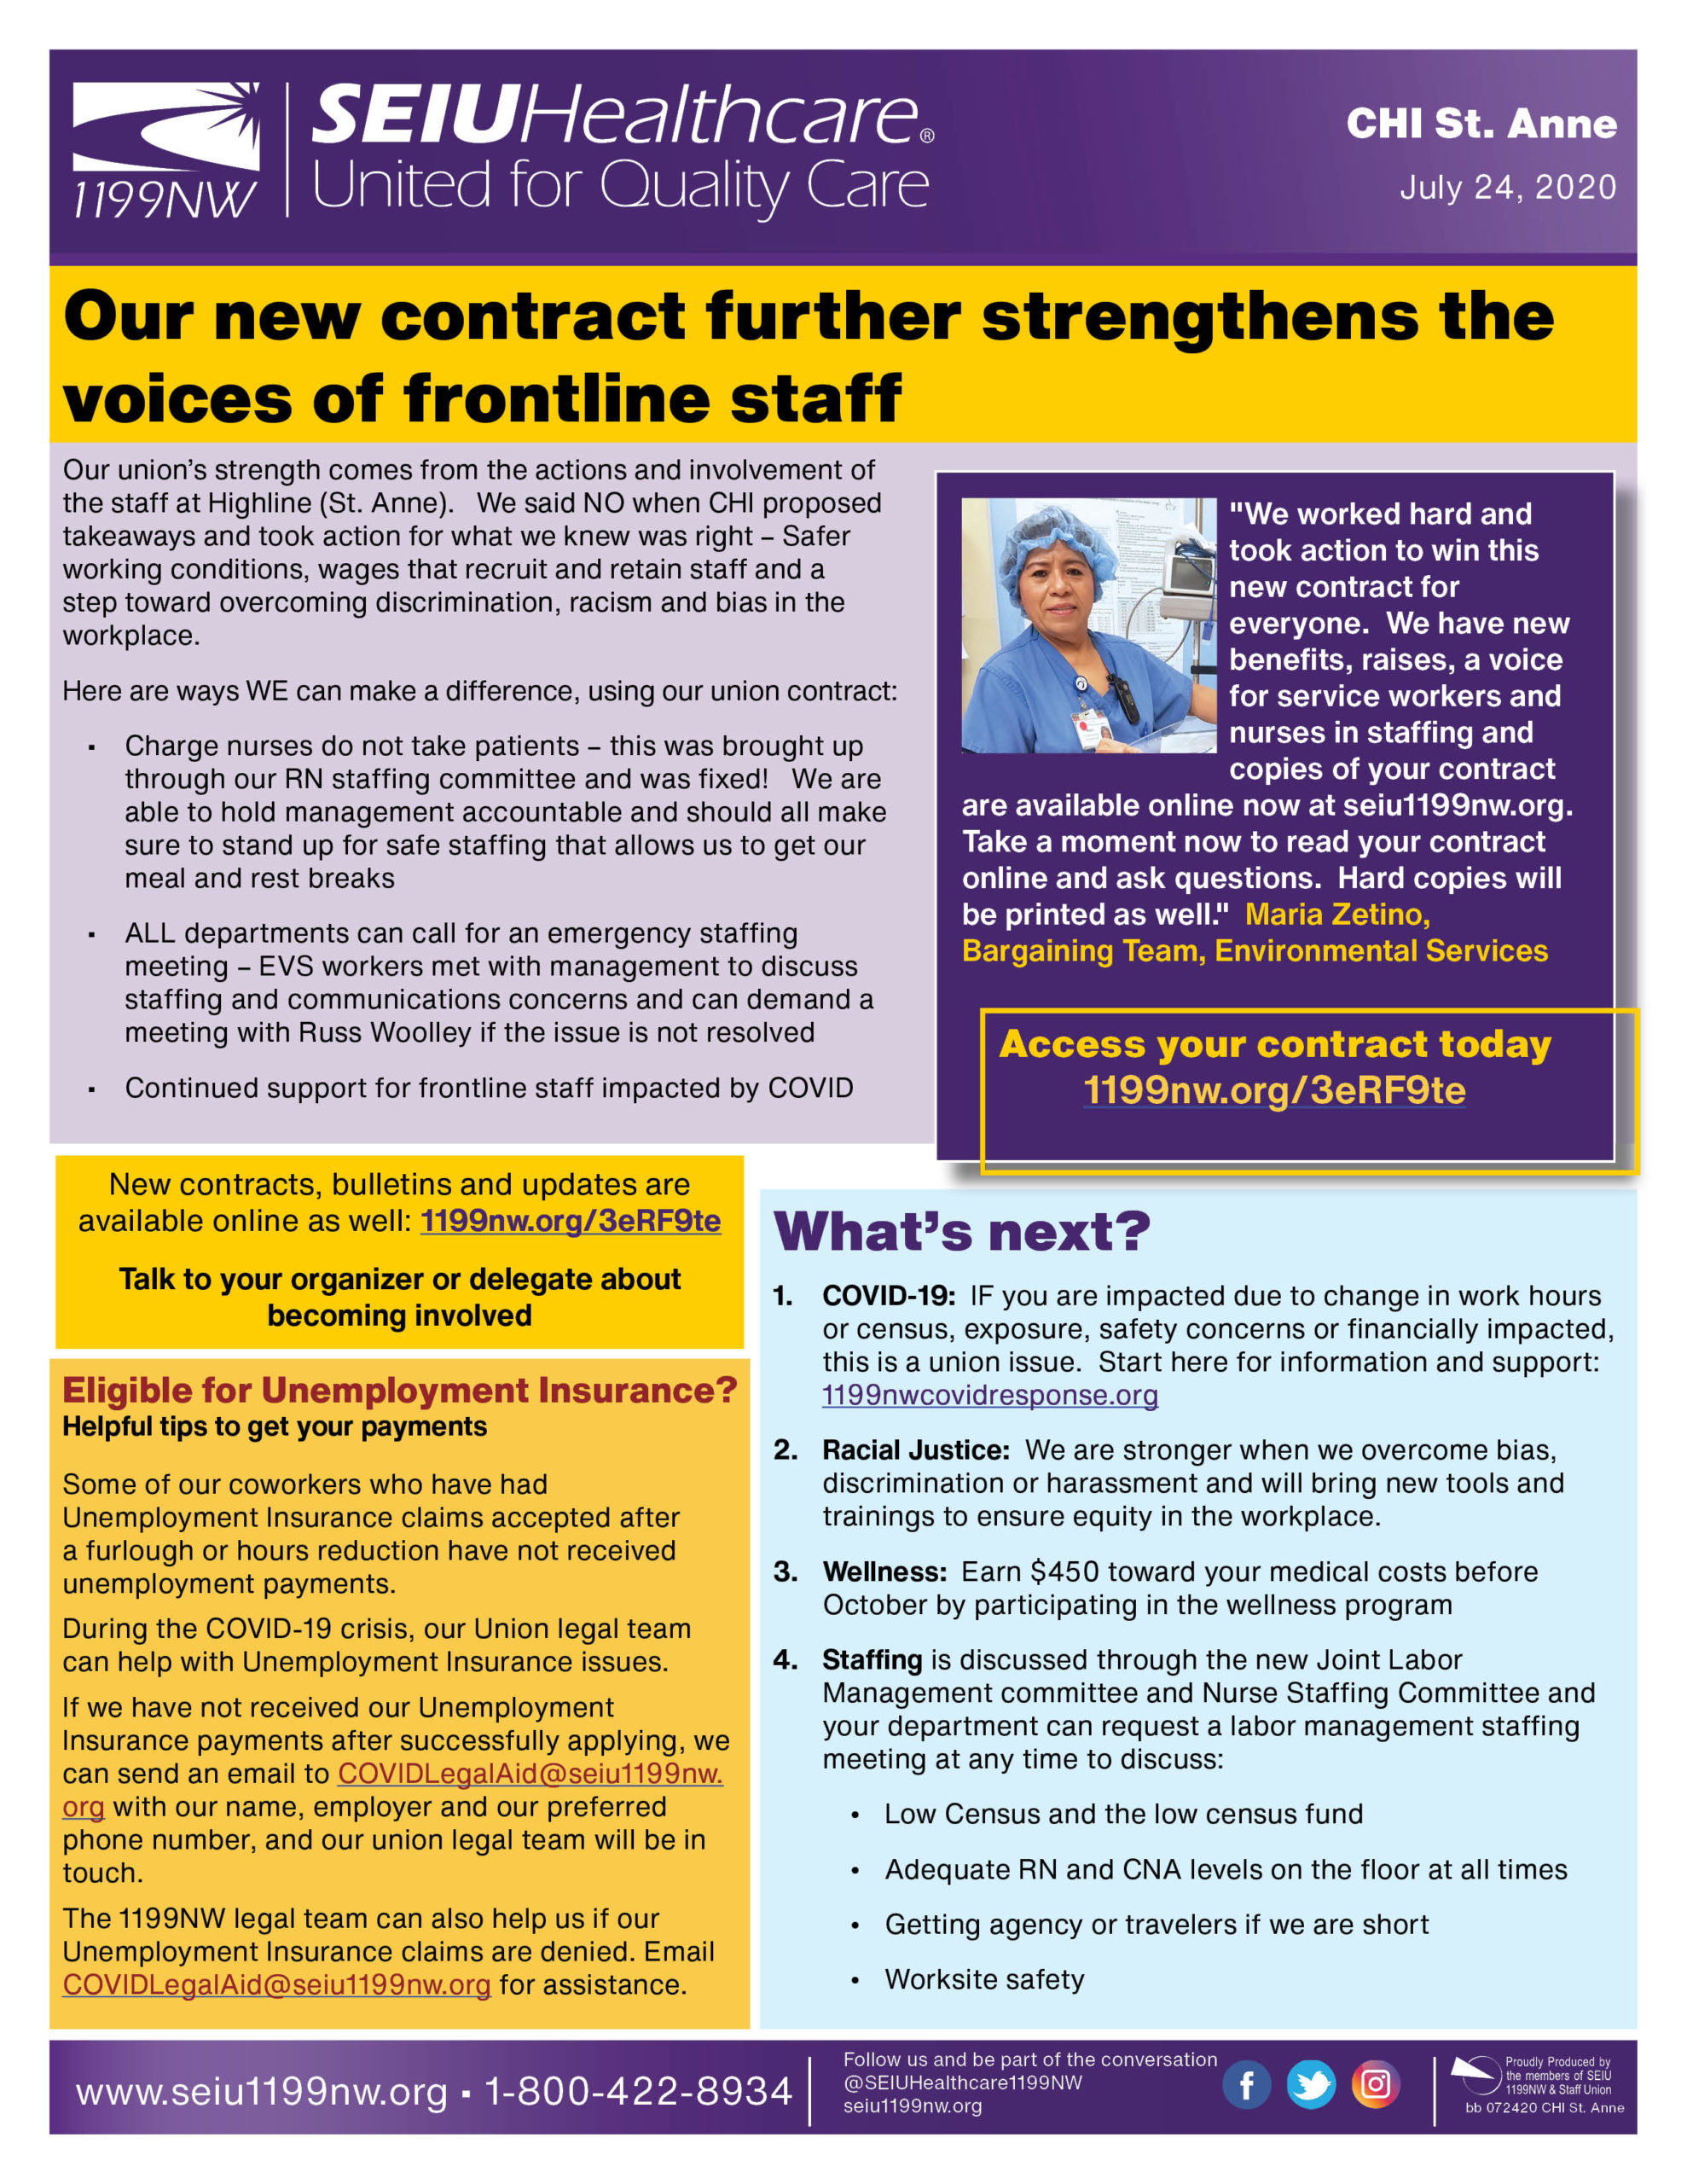 Our new contract further strengthens the voices of frontline staff